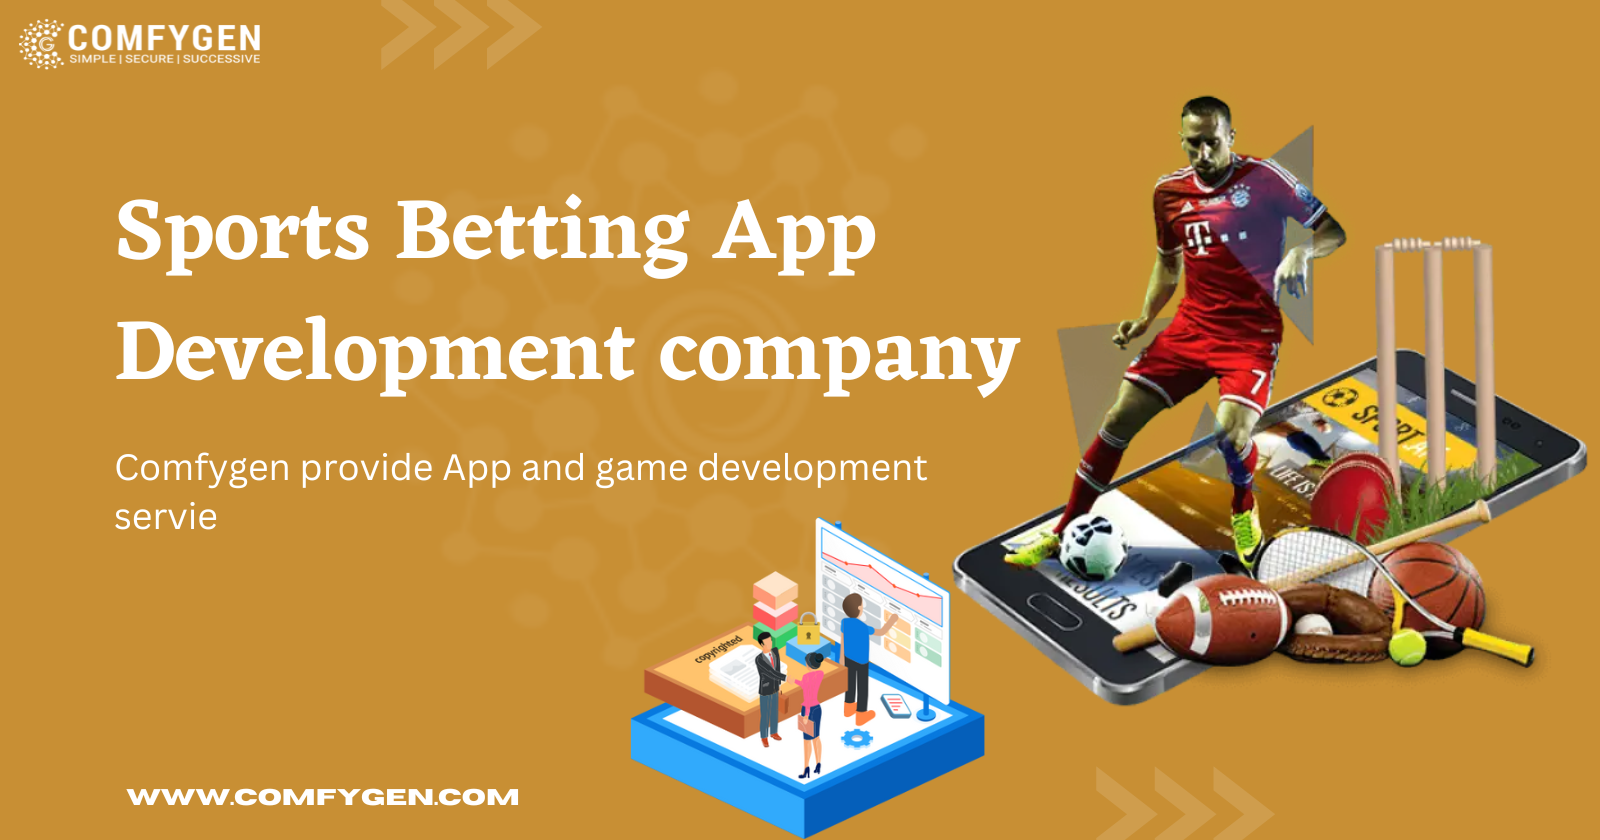 Sports Betting
App Development

Comfygen provides amazing live sports betting applications
and is one of the leading sports betting app development
companies.